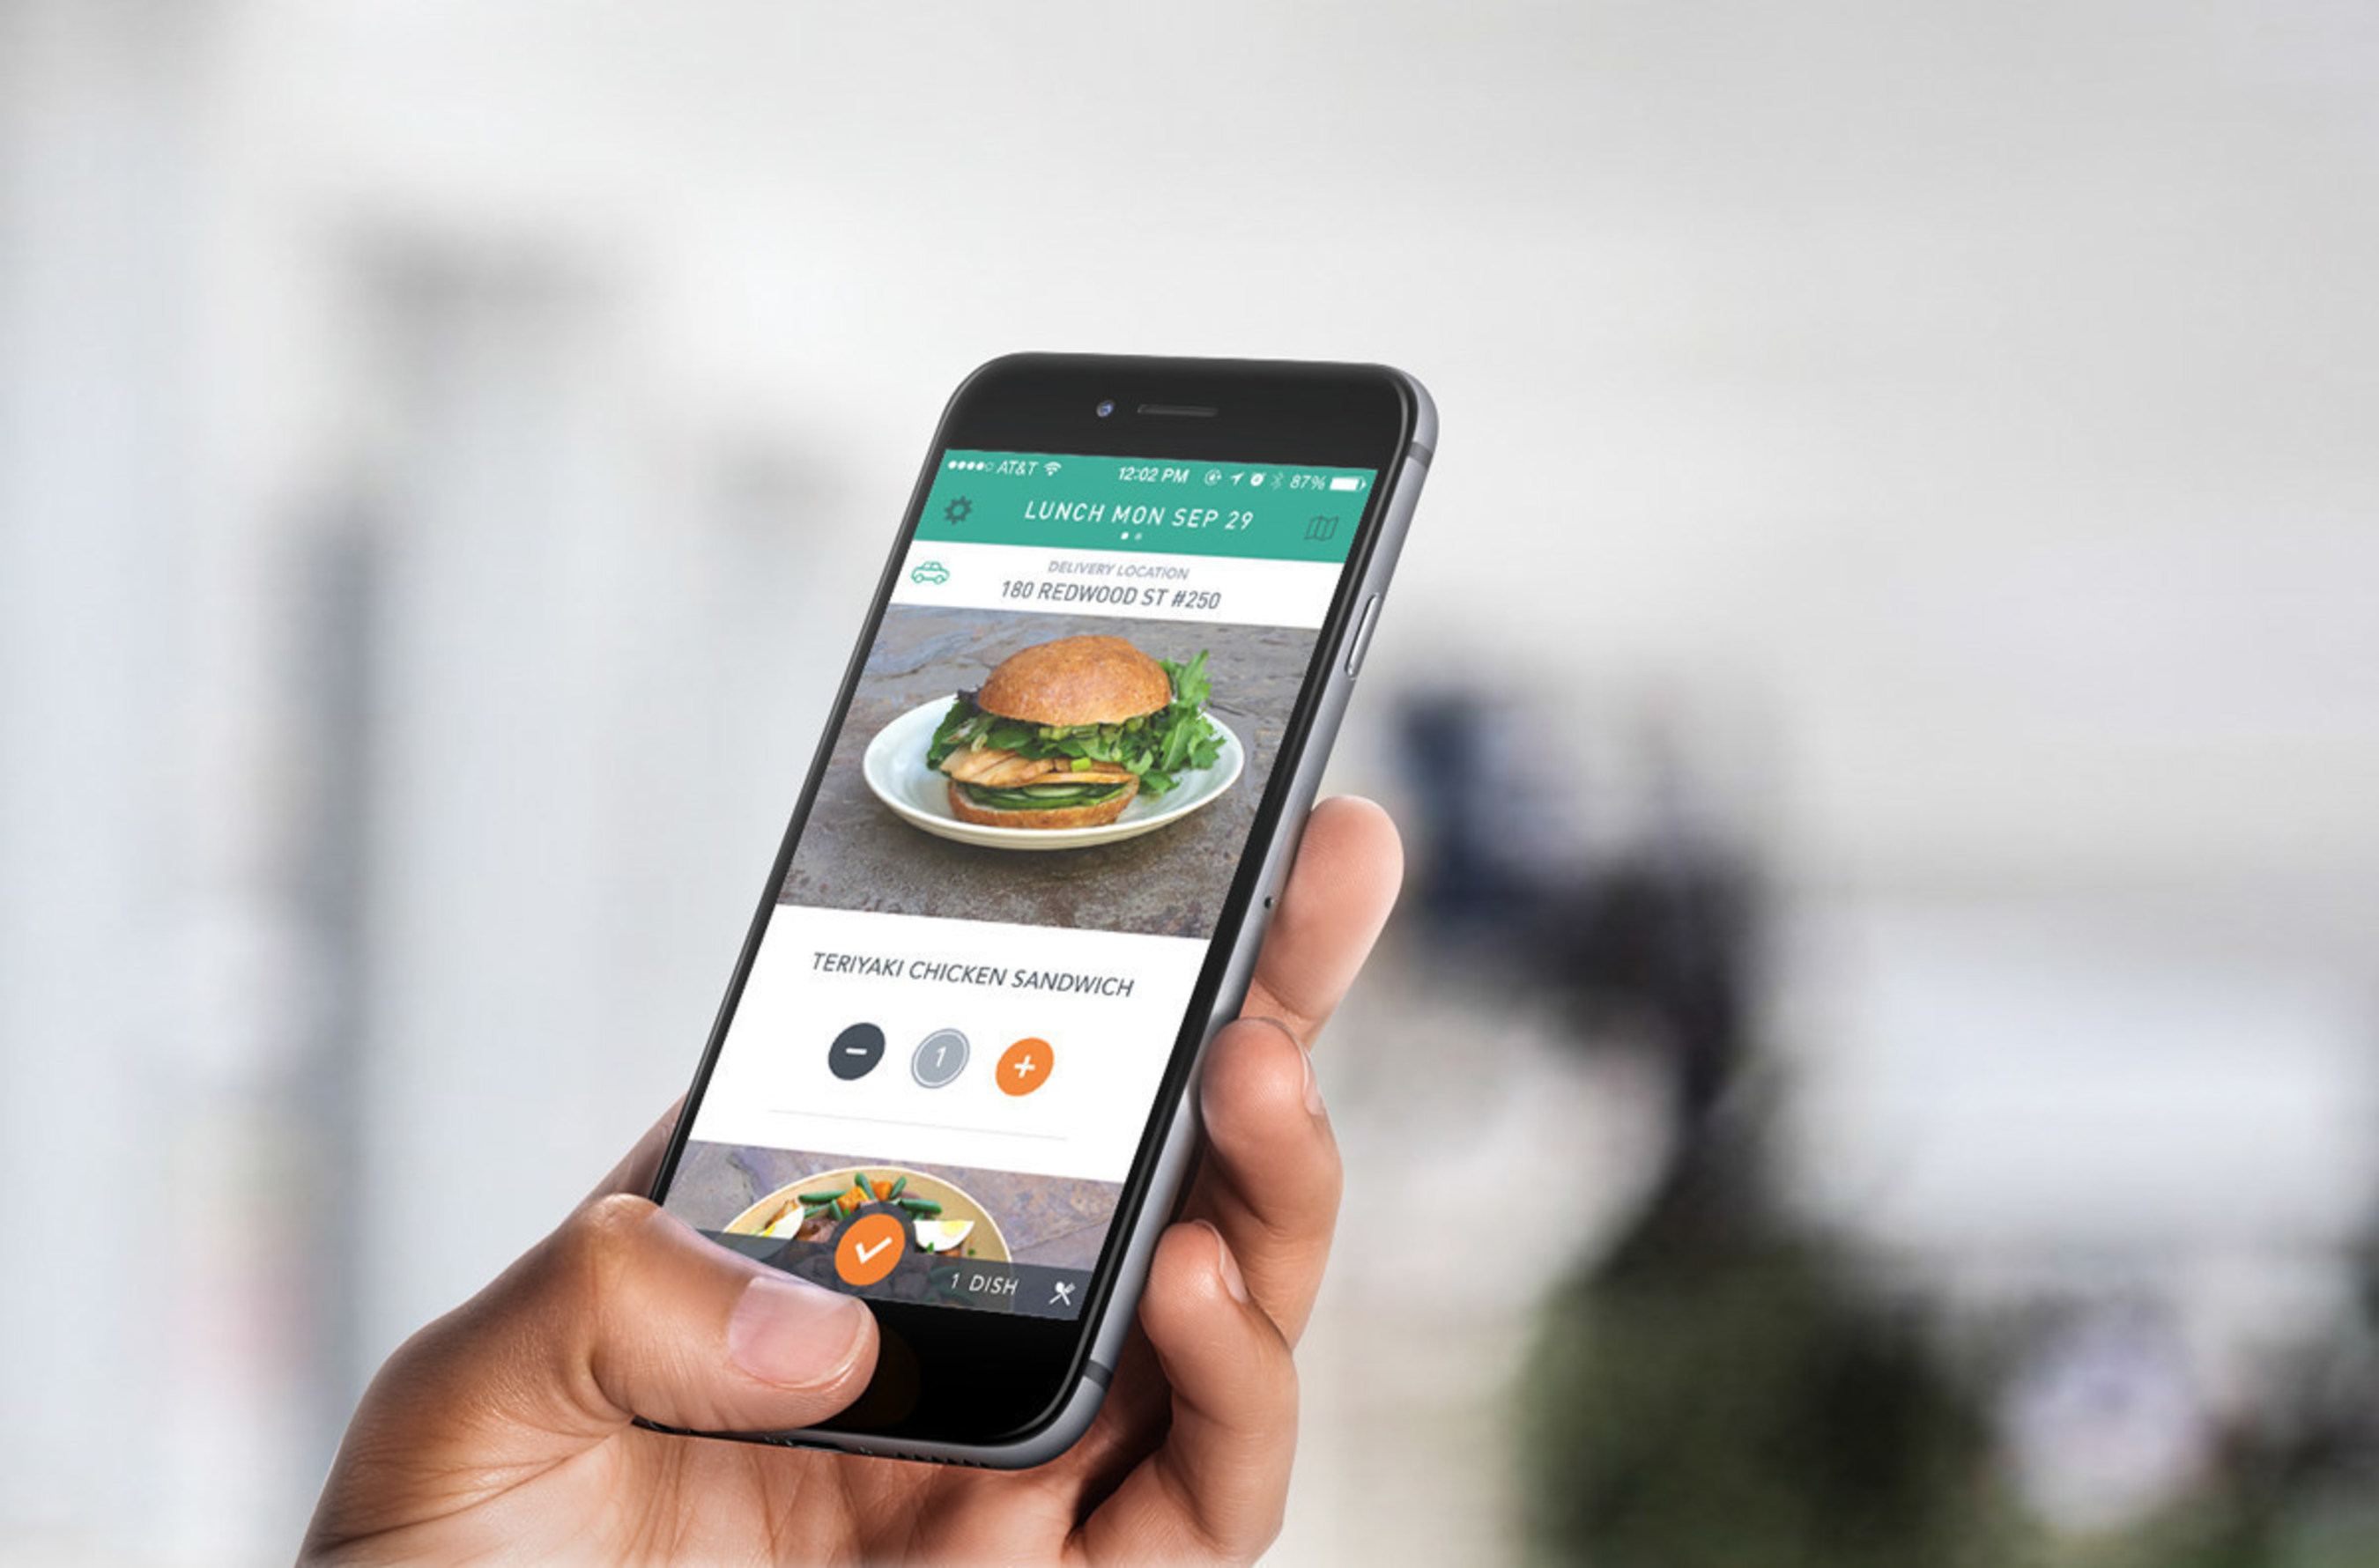 With just a few taps on the Sprig iPhone or Android app, choose from three healthy, ready to eat meal options to be delivered in 15 minutes.